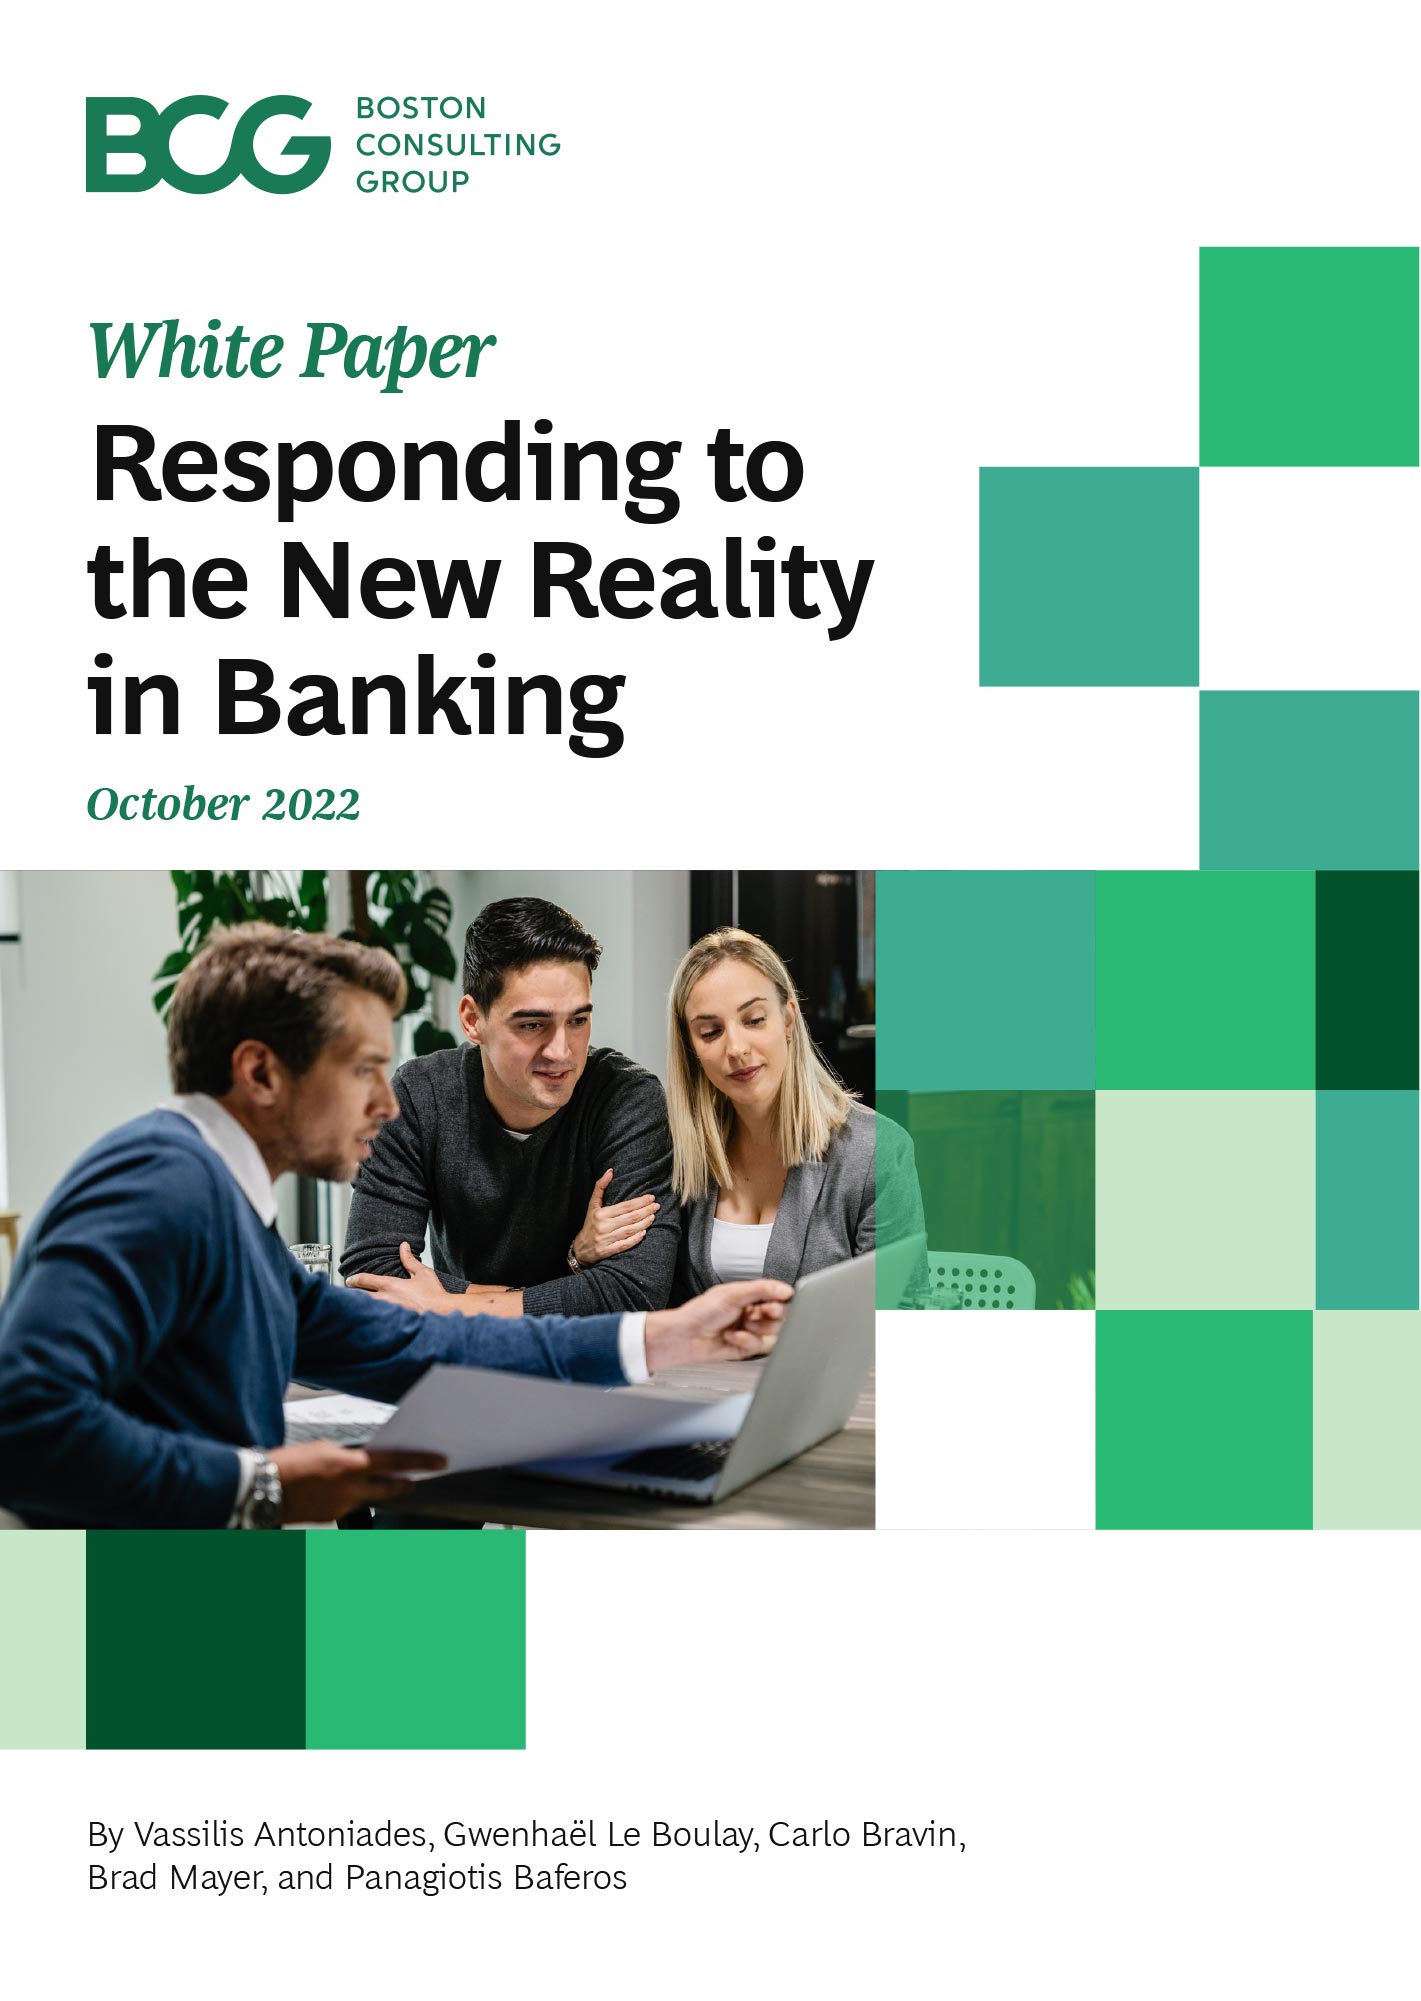 Responding to the New Reality in Banking